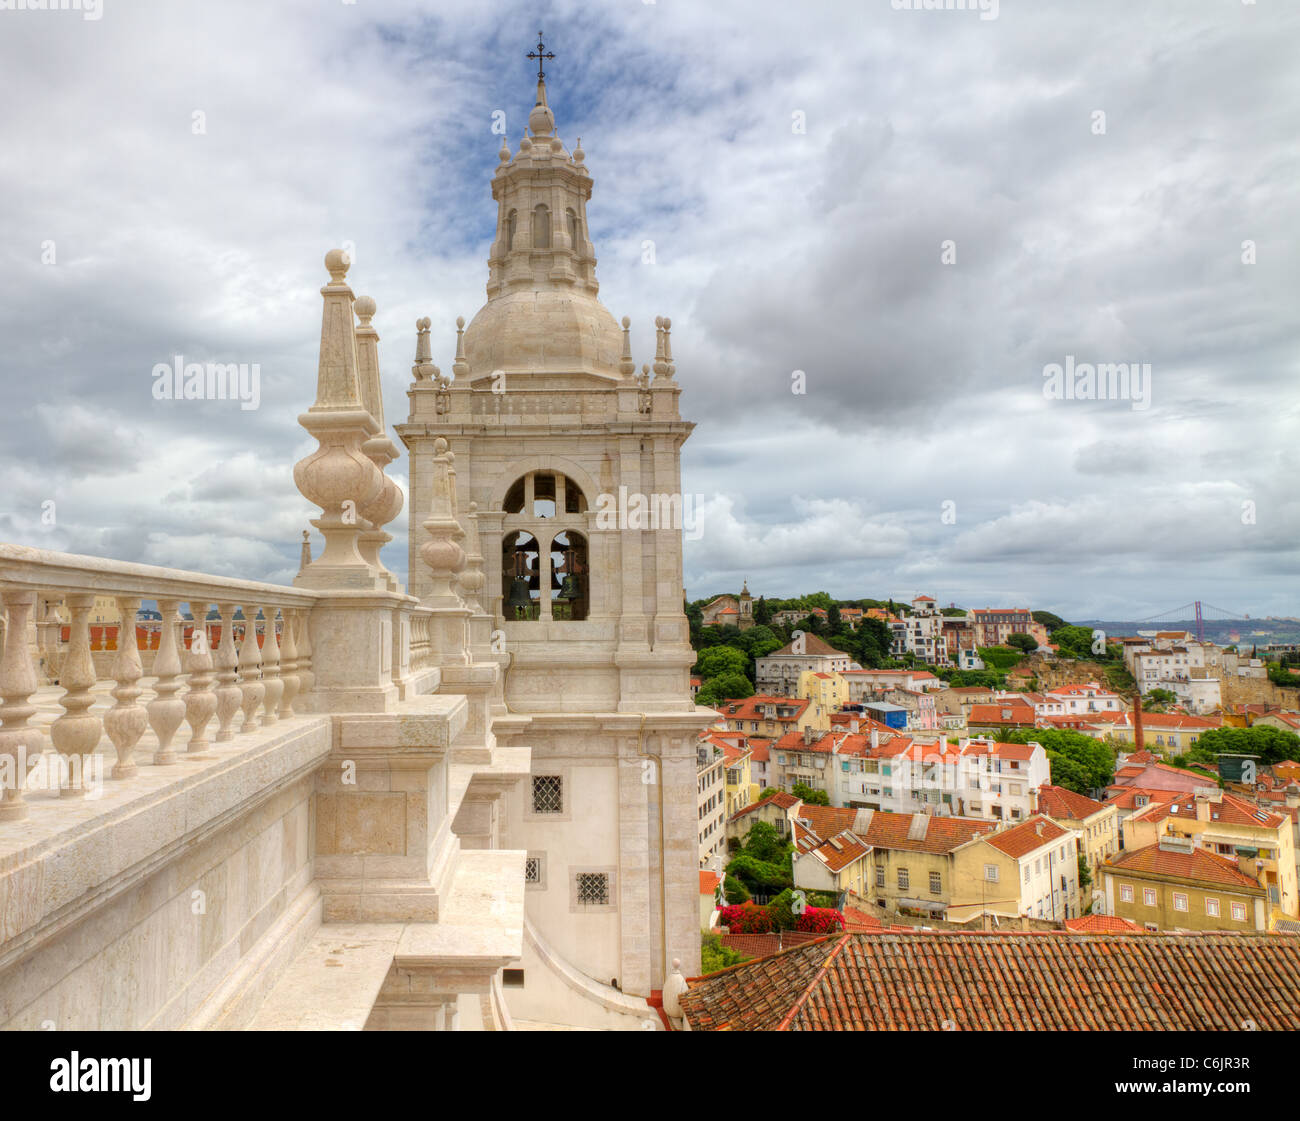 White roof with decorations and bell tower in mannerist style Lisbon, Portugal Stock Photo